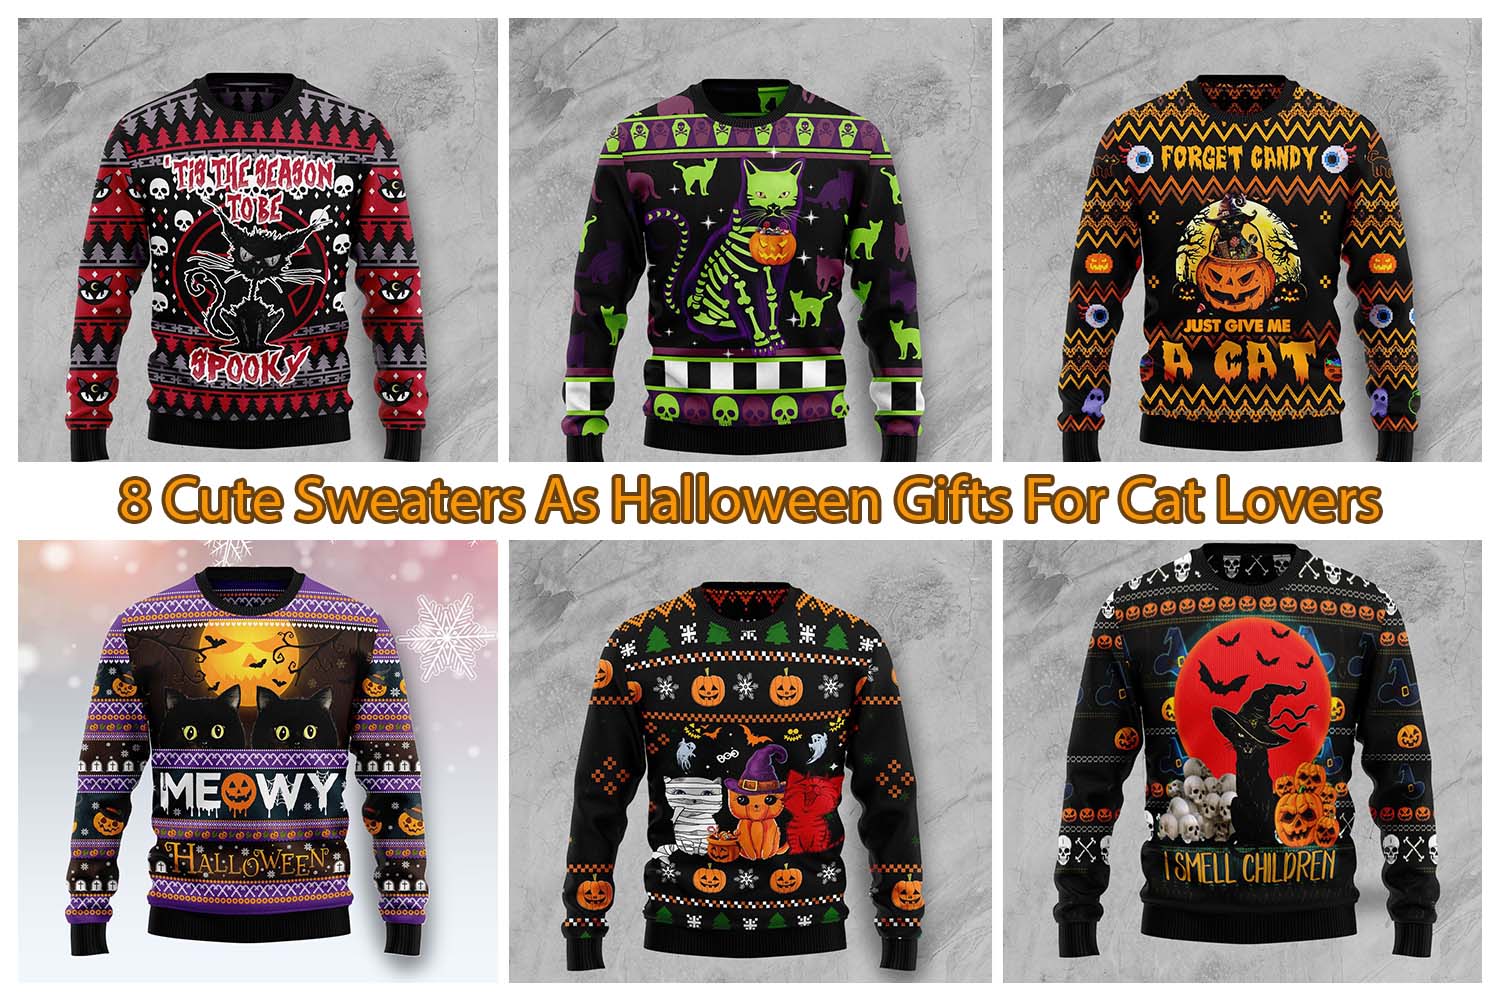 8 Cute Sweaters As Halloween Gifts For Cat Lovers